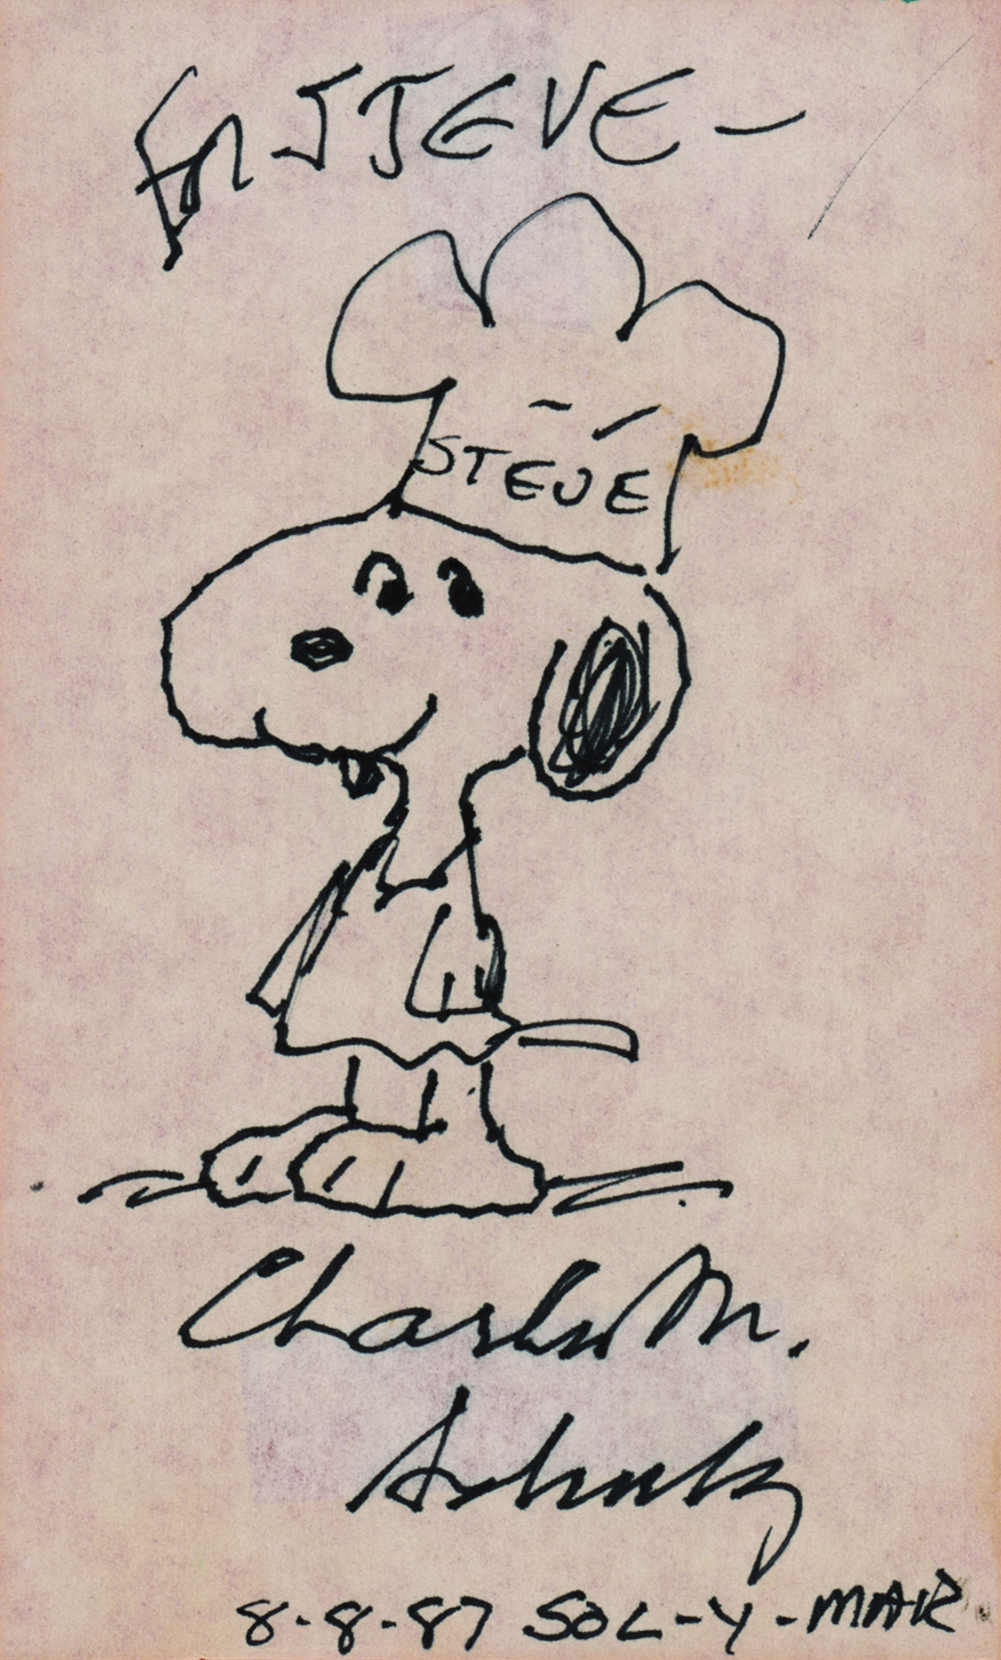 Lot #405 Charles Schulz Original Sketch of Snoopy - Image 1